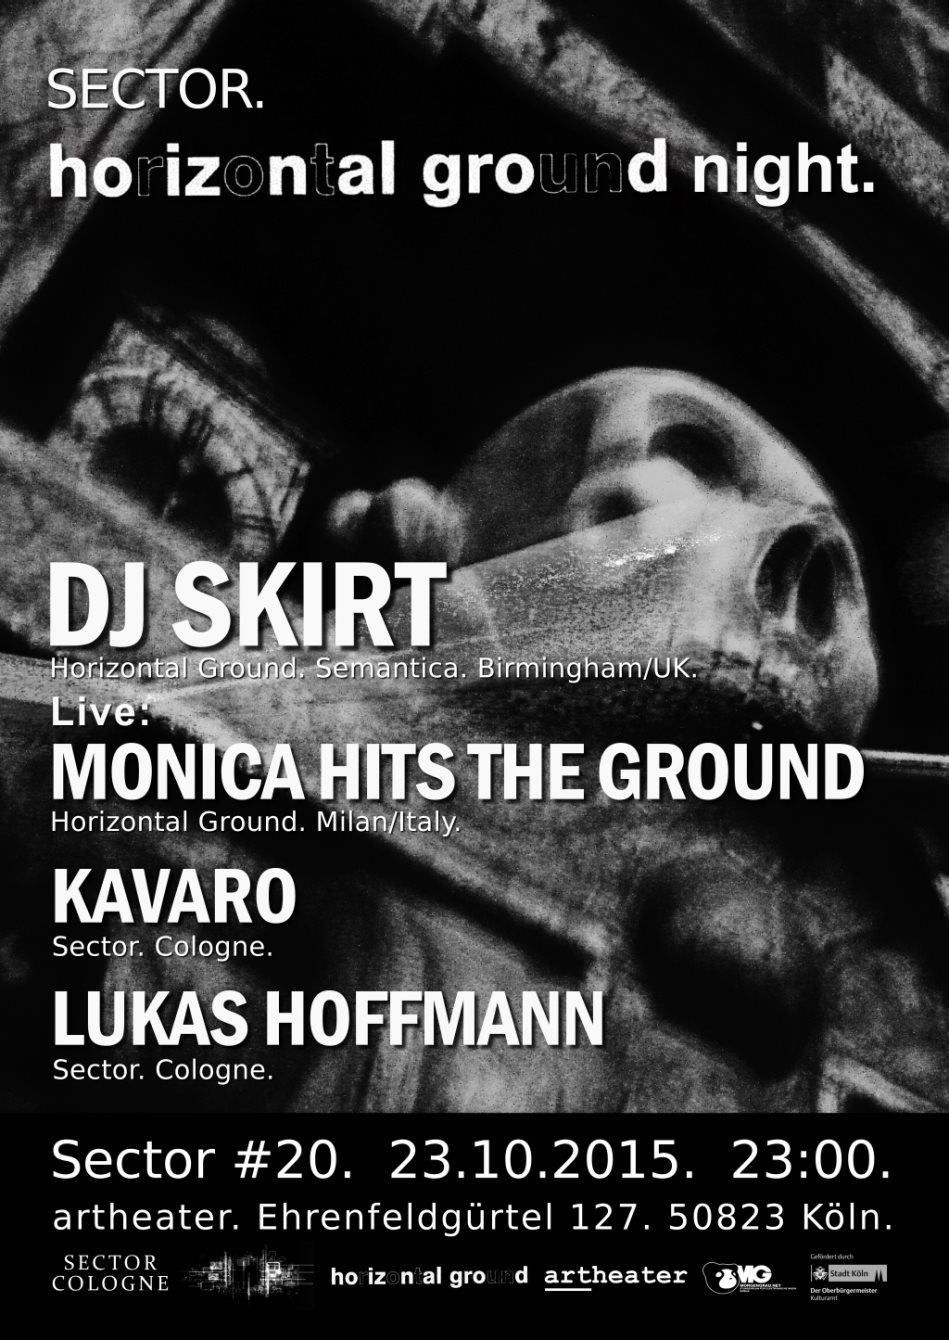 Sector #20 Horizontal Ground Night with DJ Skirt - Flyer front